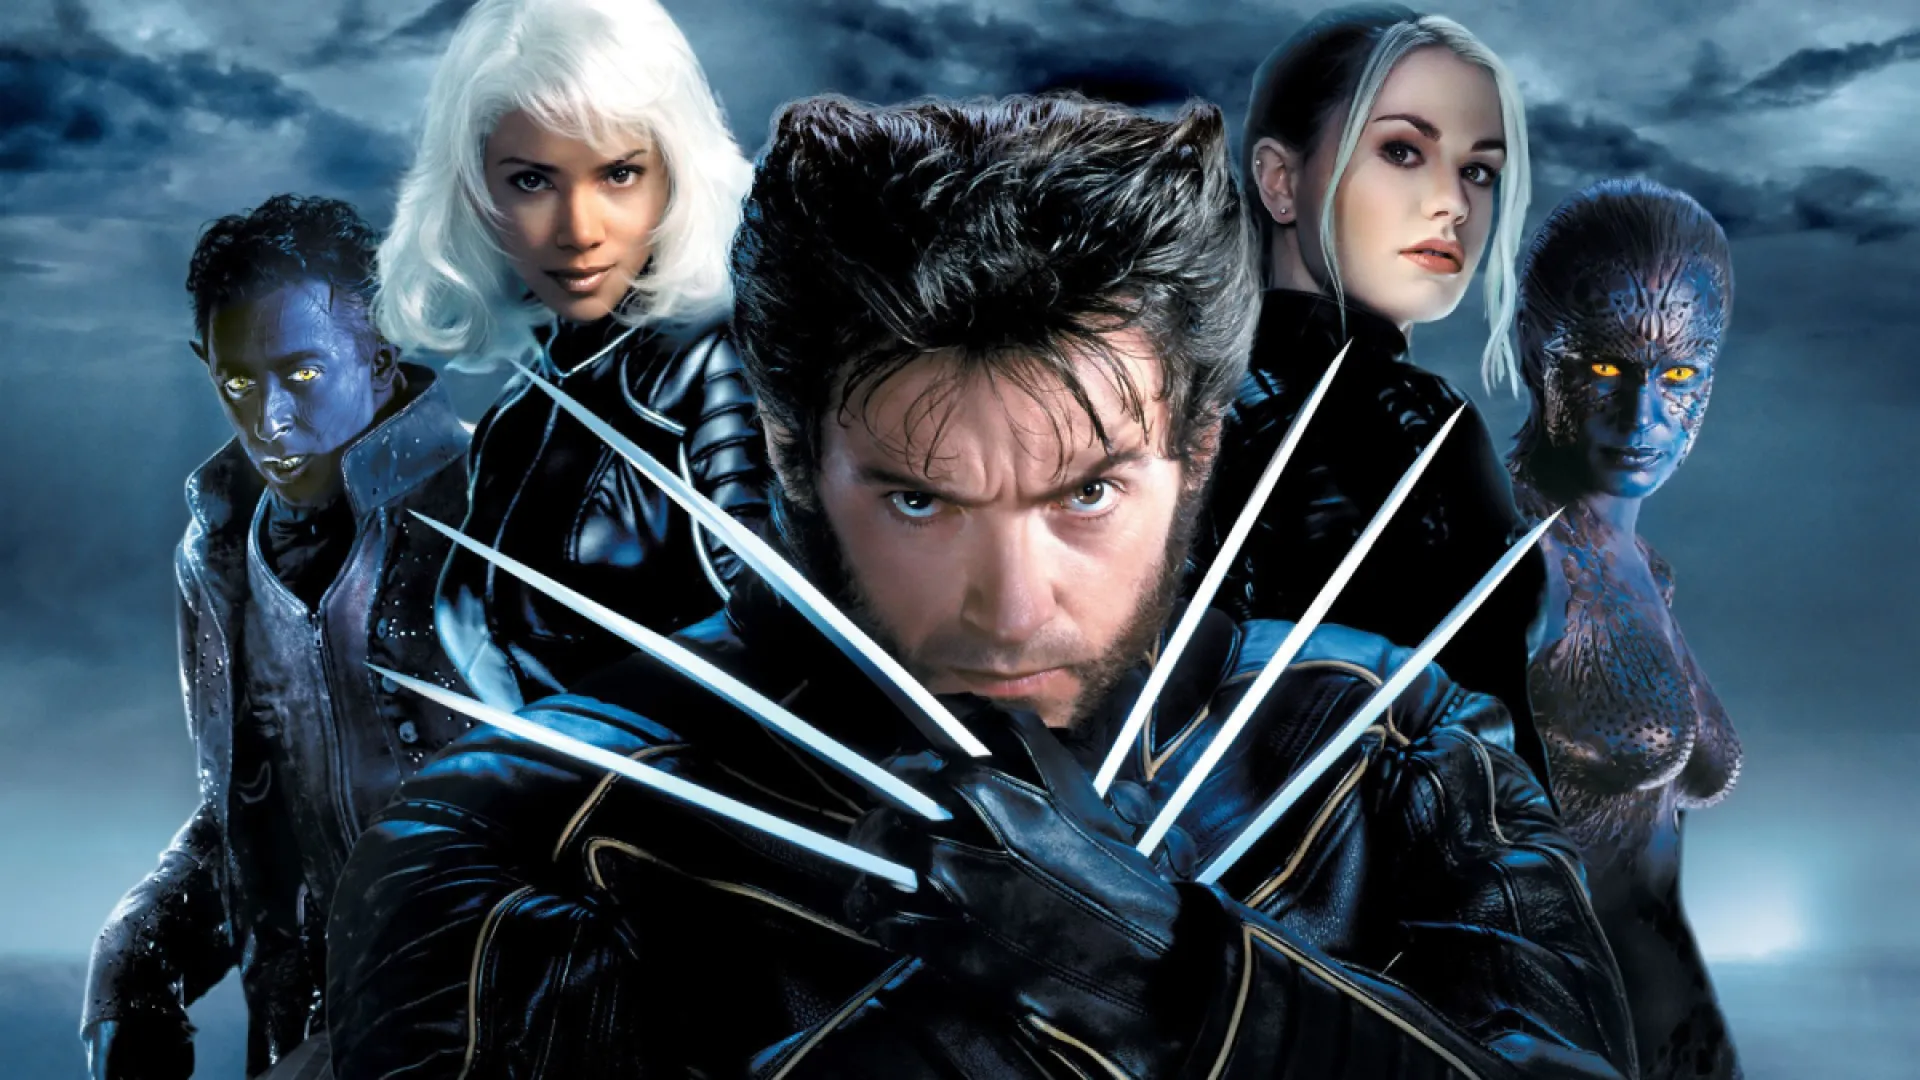 Hugh Jackman as Wolverine in X2, surrounded by other cast members